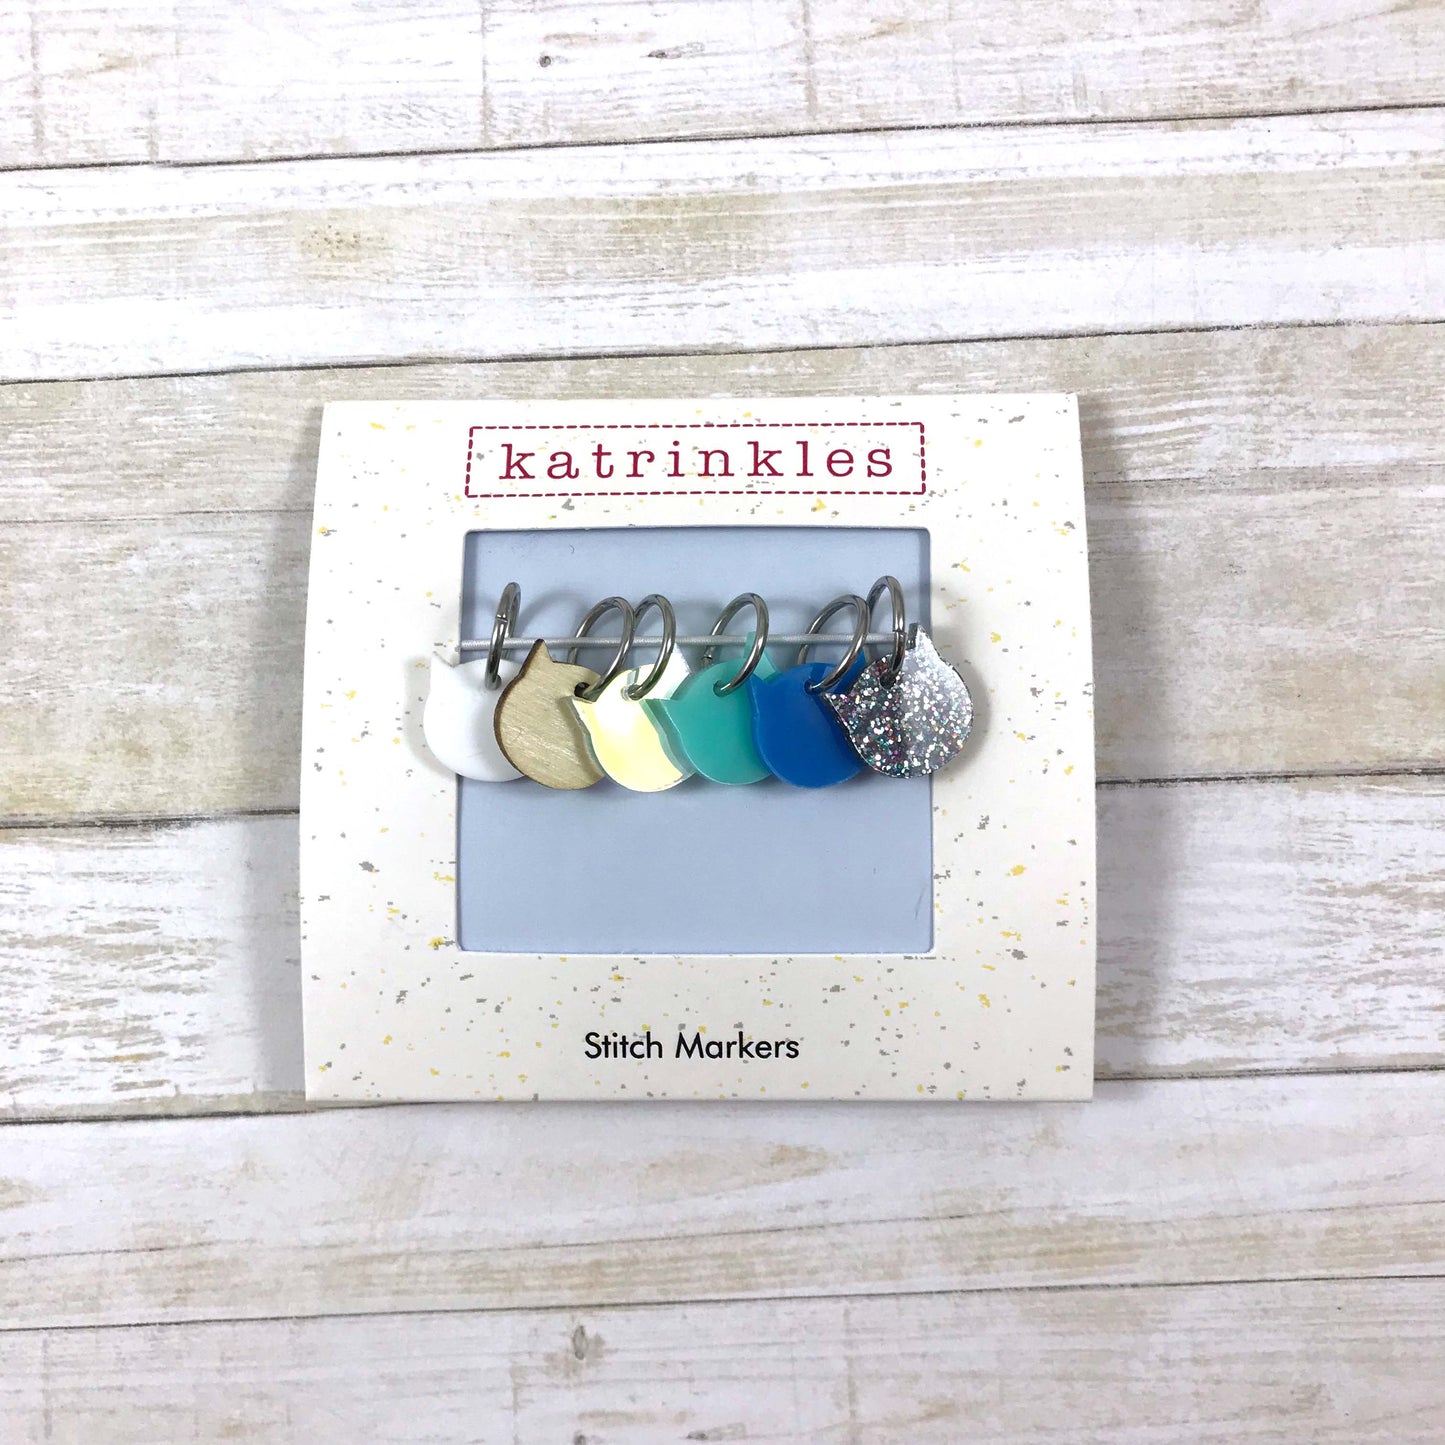 Cat-rinkles Cat Collection 2022 - Acrylic Stitch Markers - Set of 6 - New Colors - 20% Off